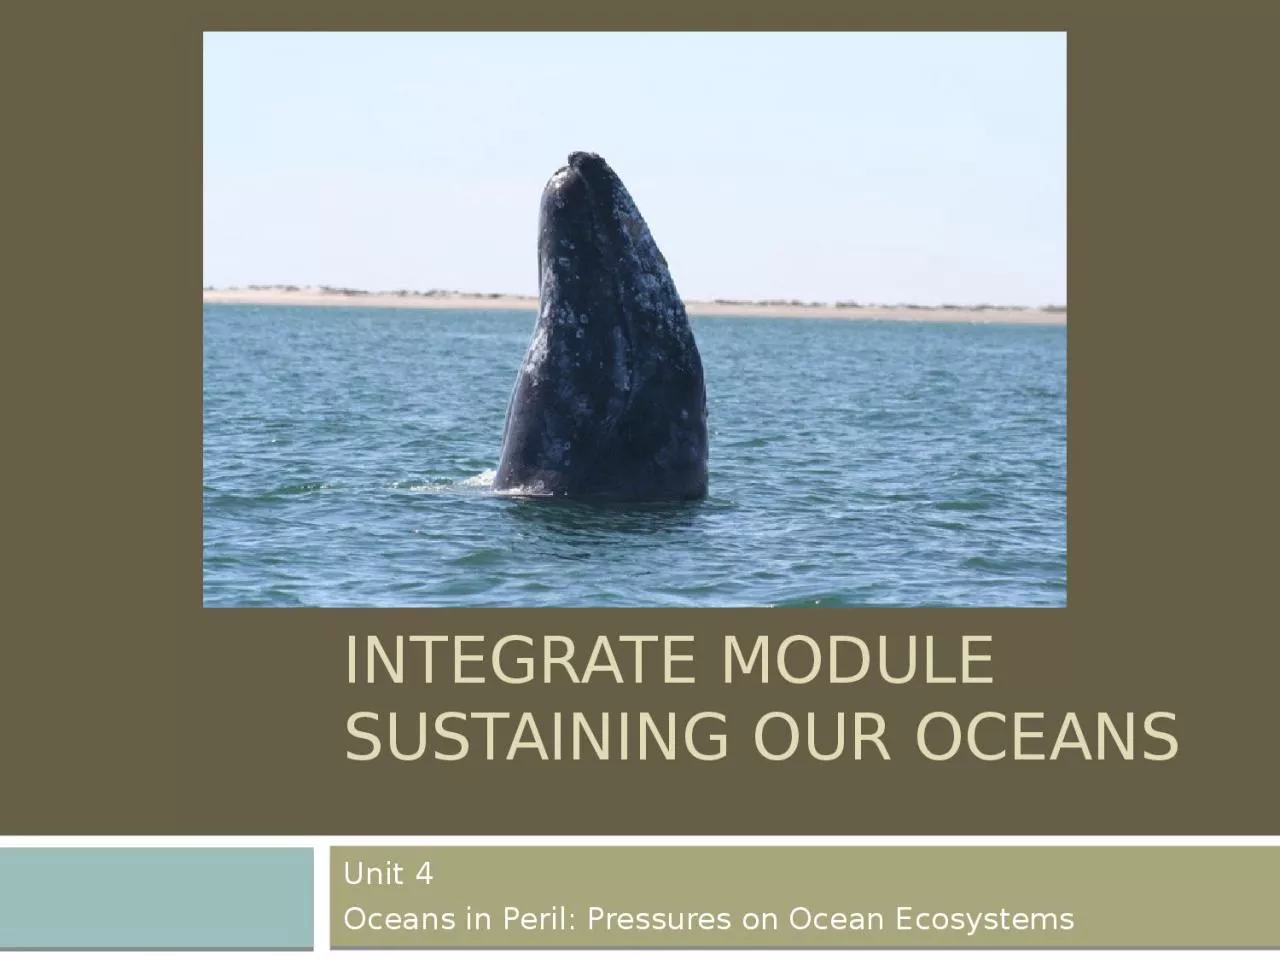 InTeGrate Module  Sustaining Our Oceans